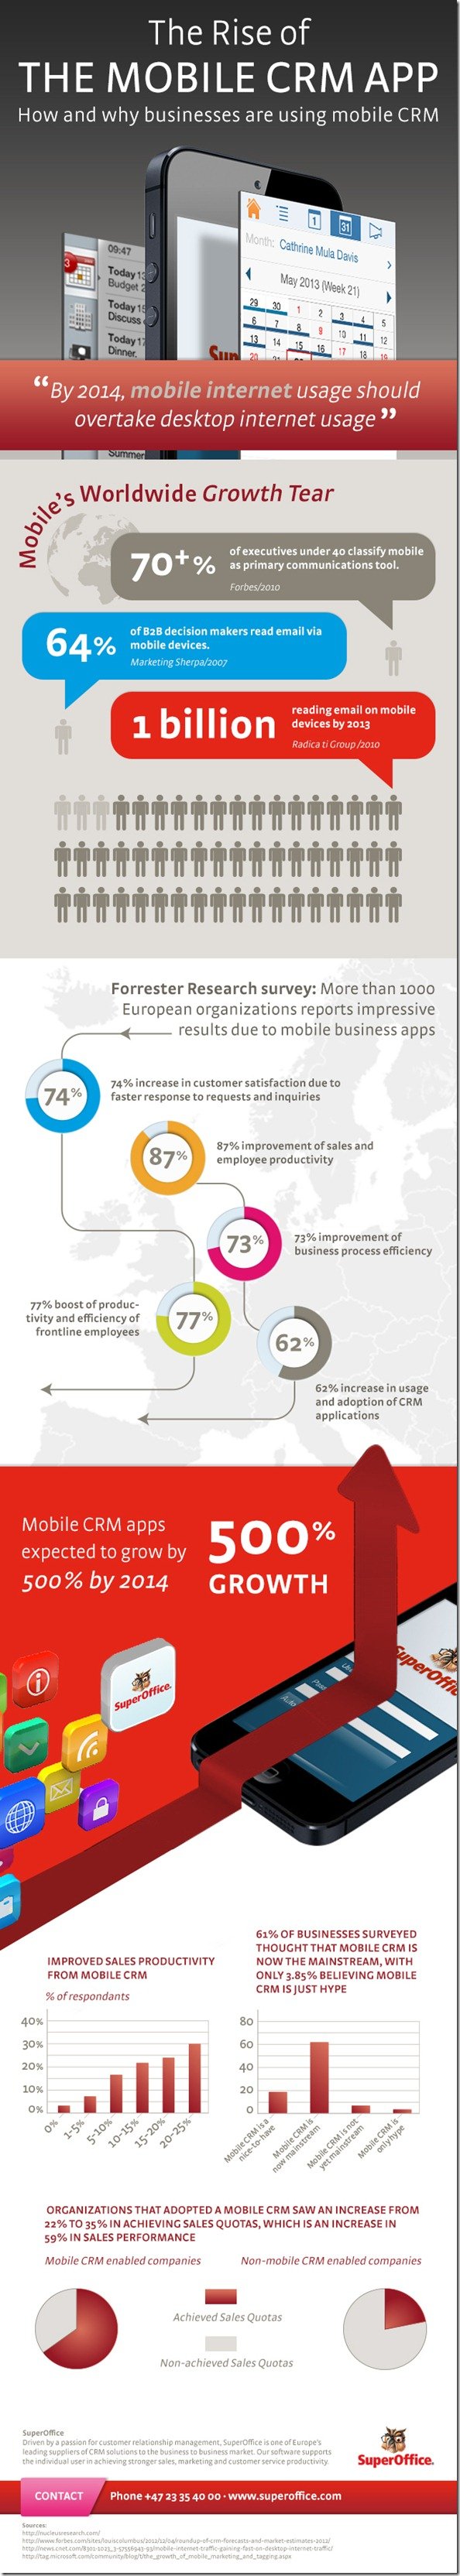 Mobile CRM Infographic